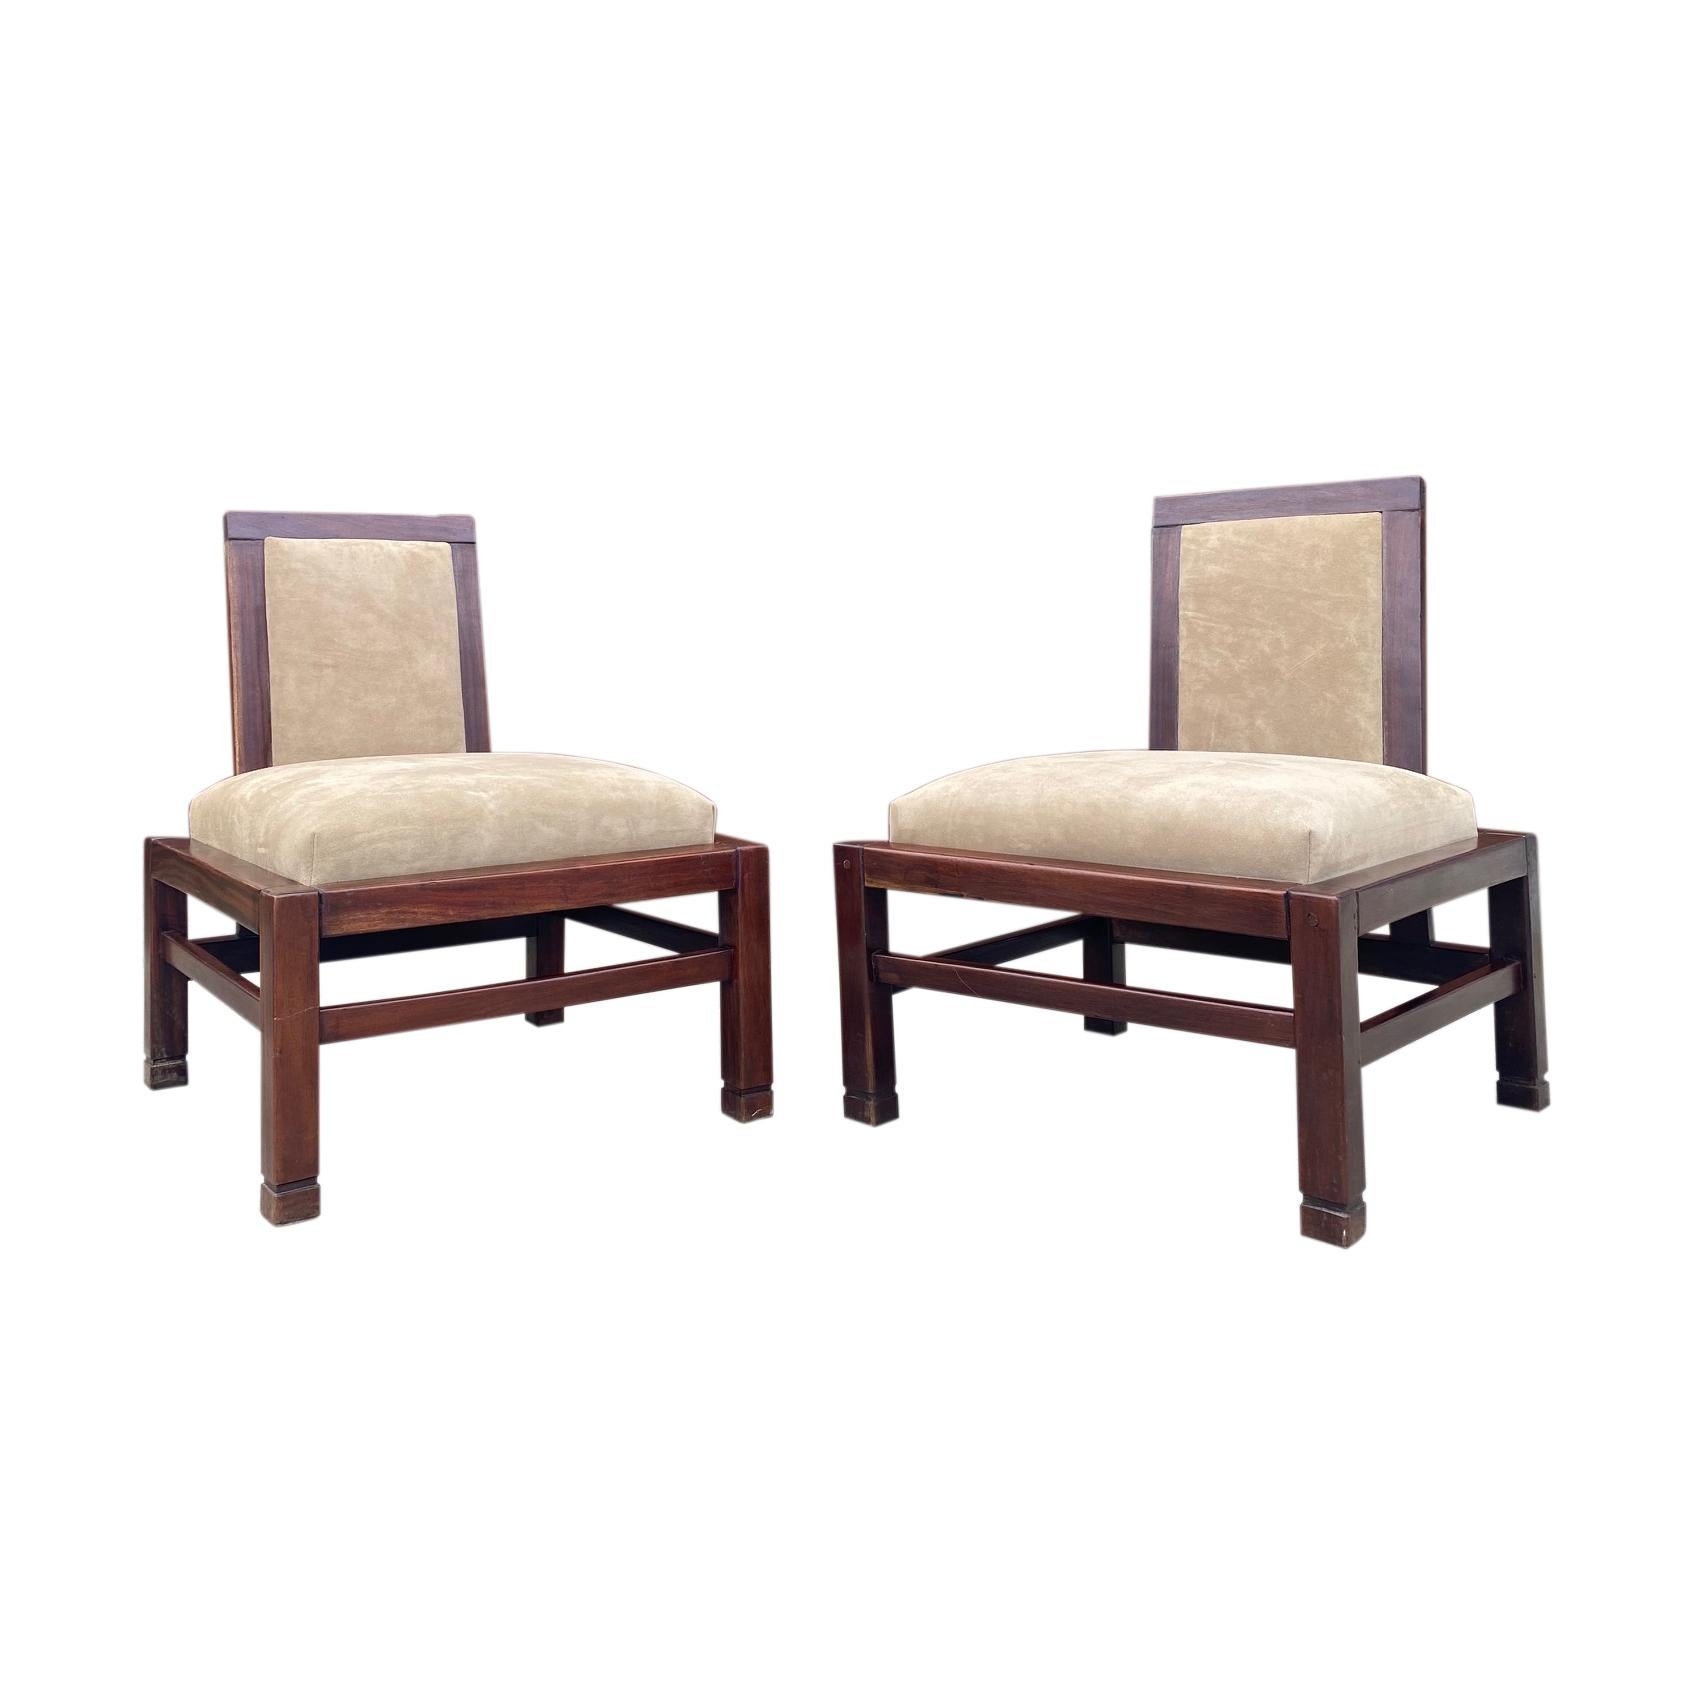 Pair of solid mahogany with new custom suede upholstery slipper chairs. Square profile frames support inset backrests and have subtle Far East Asian influences. Solid wood frames with visible through-tenon joinery reminiscent of early Japanese